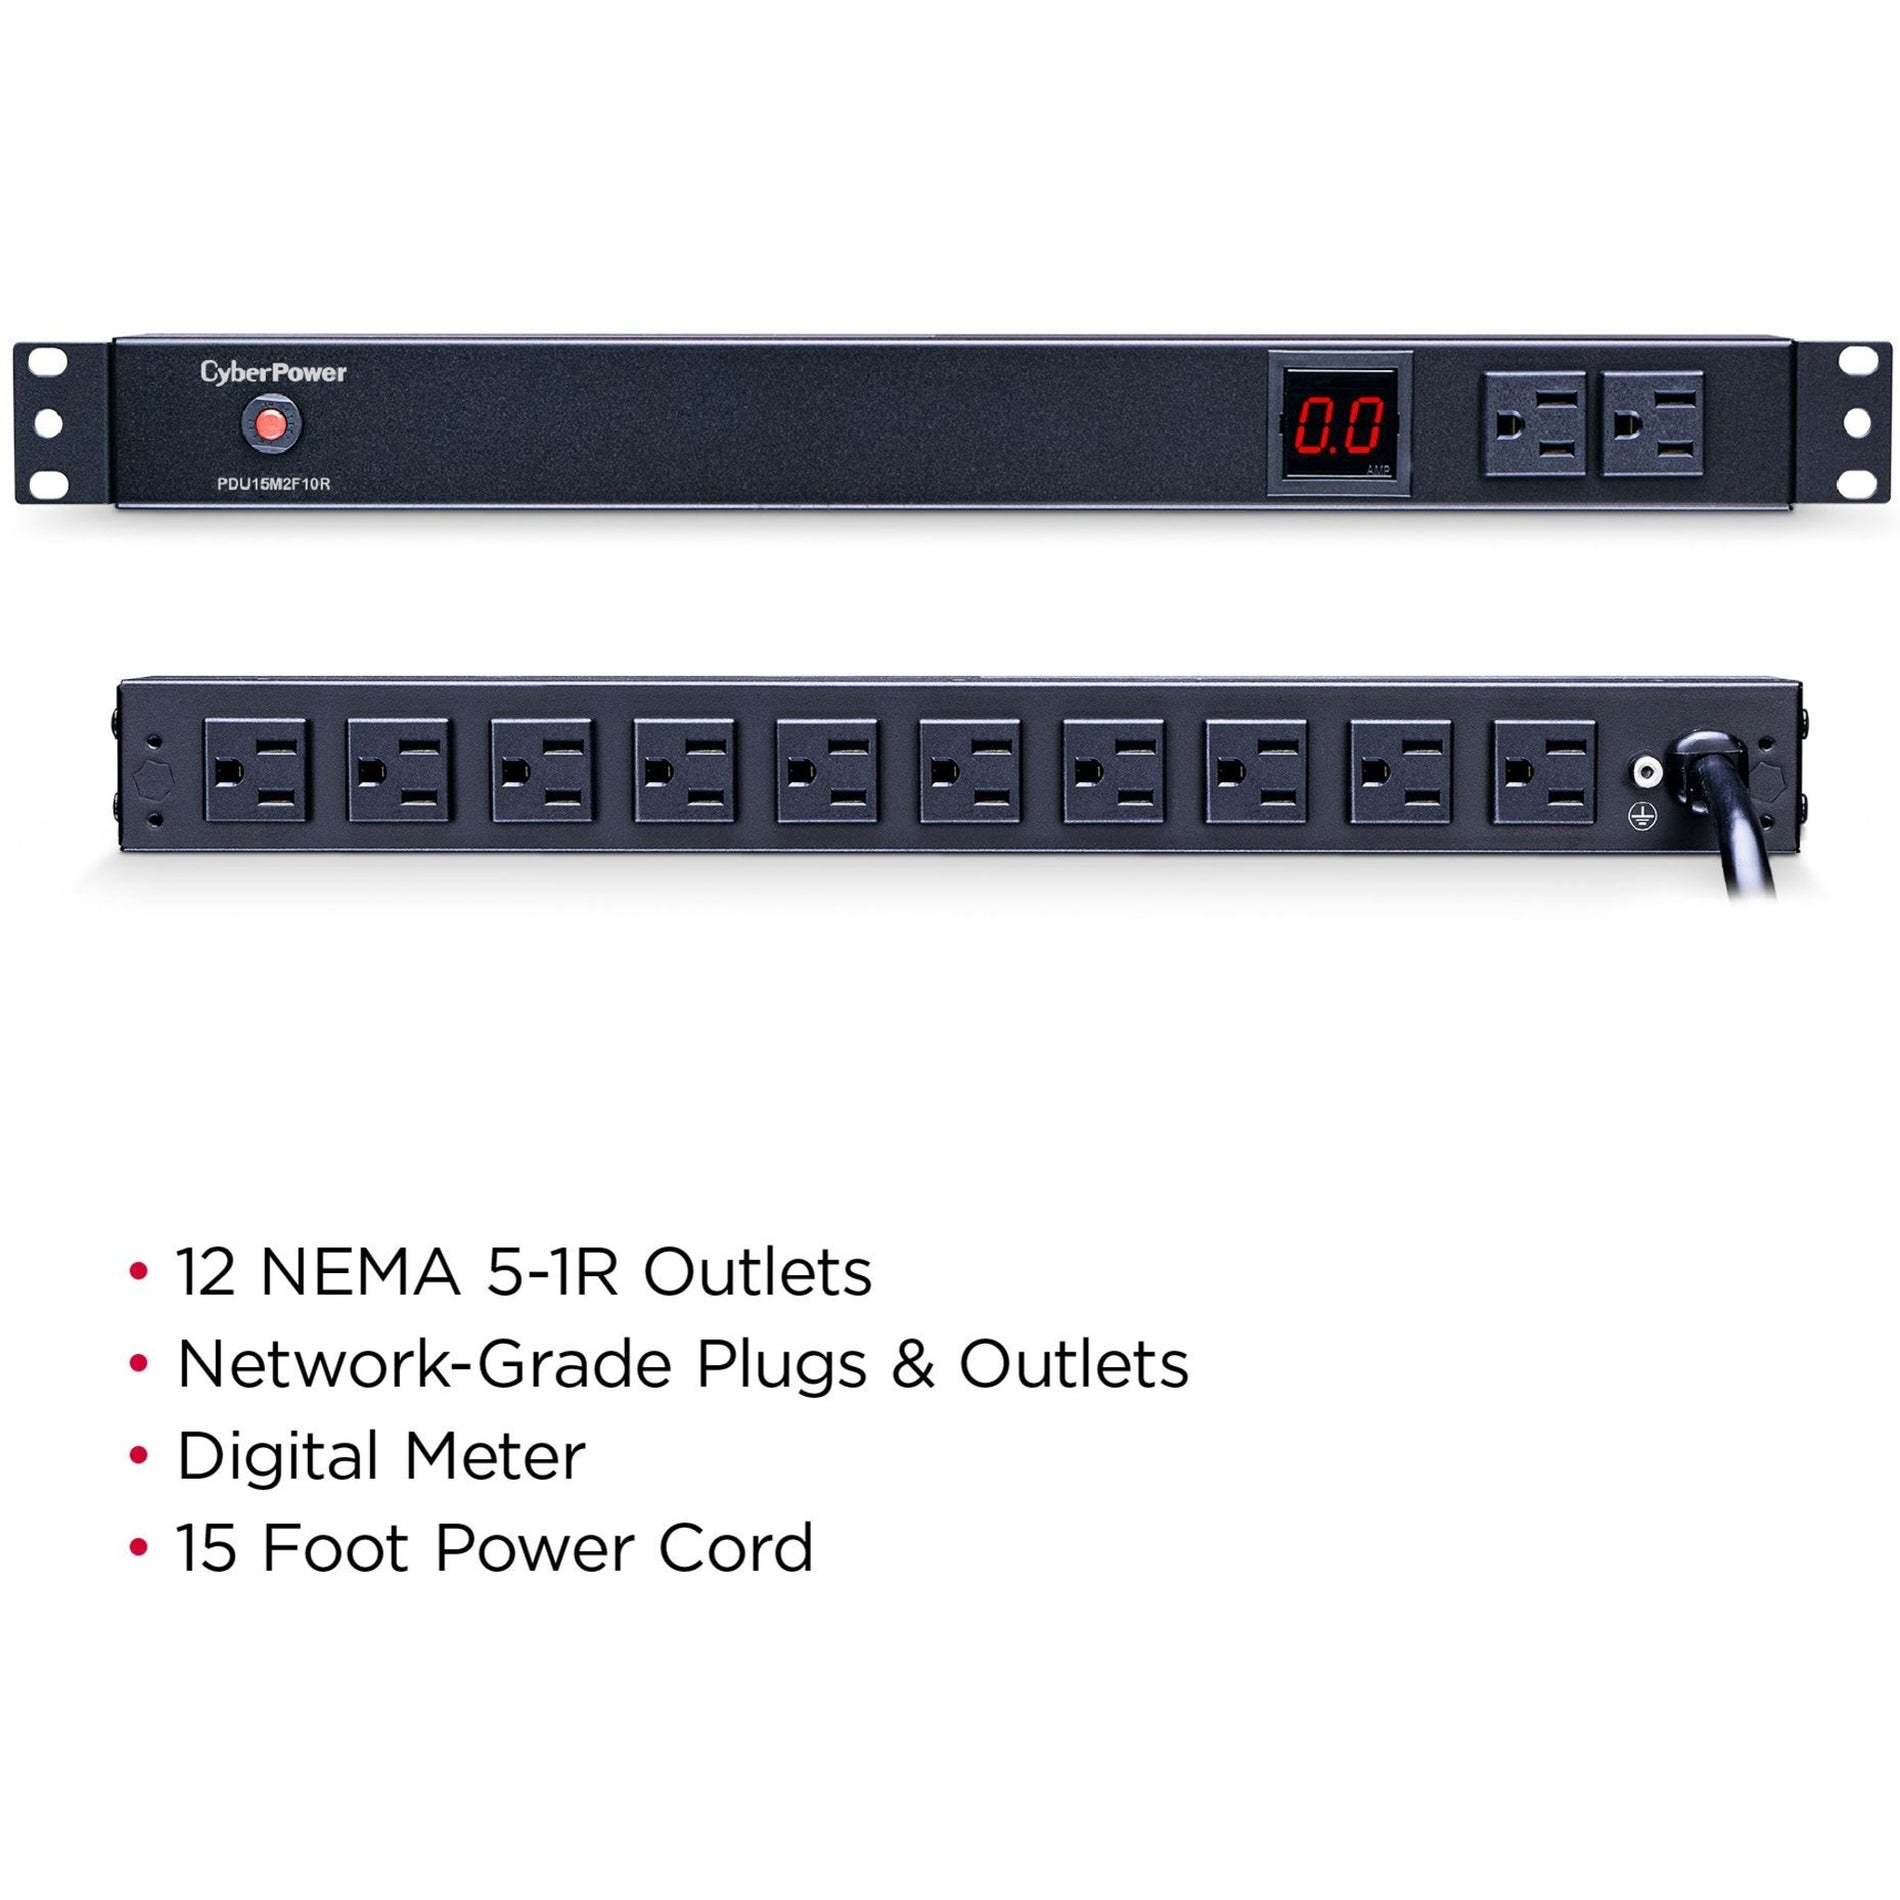 CyberPower PDU15M2F10R 12-Outlets PDU, 100-125VAC 15A Metered Power Distribution Unit